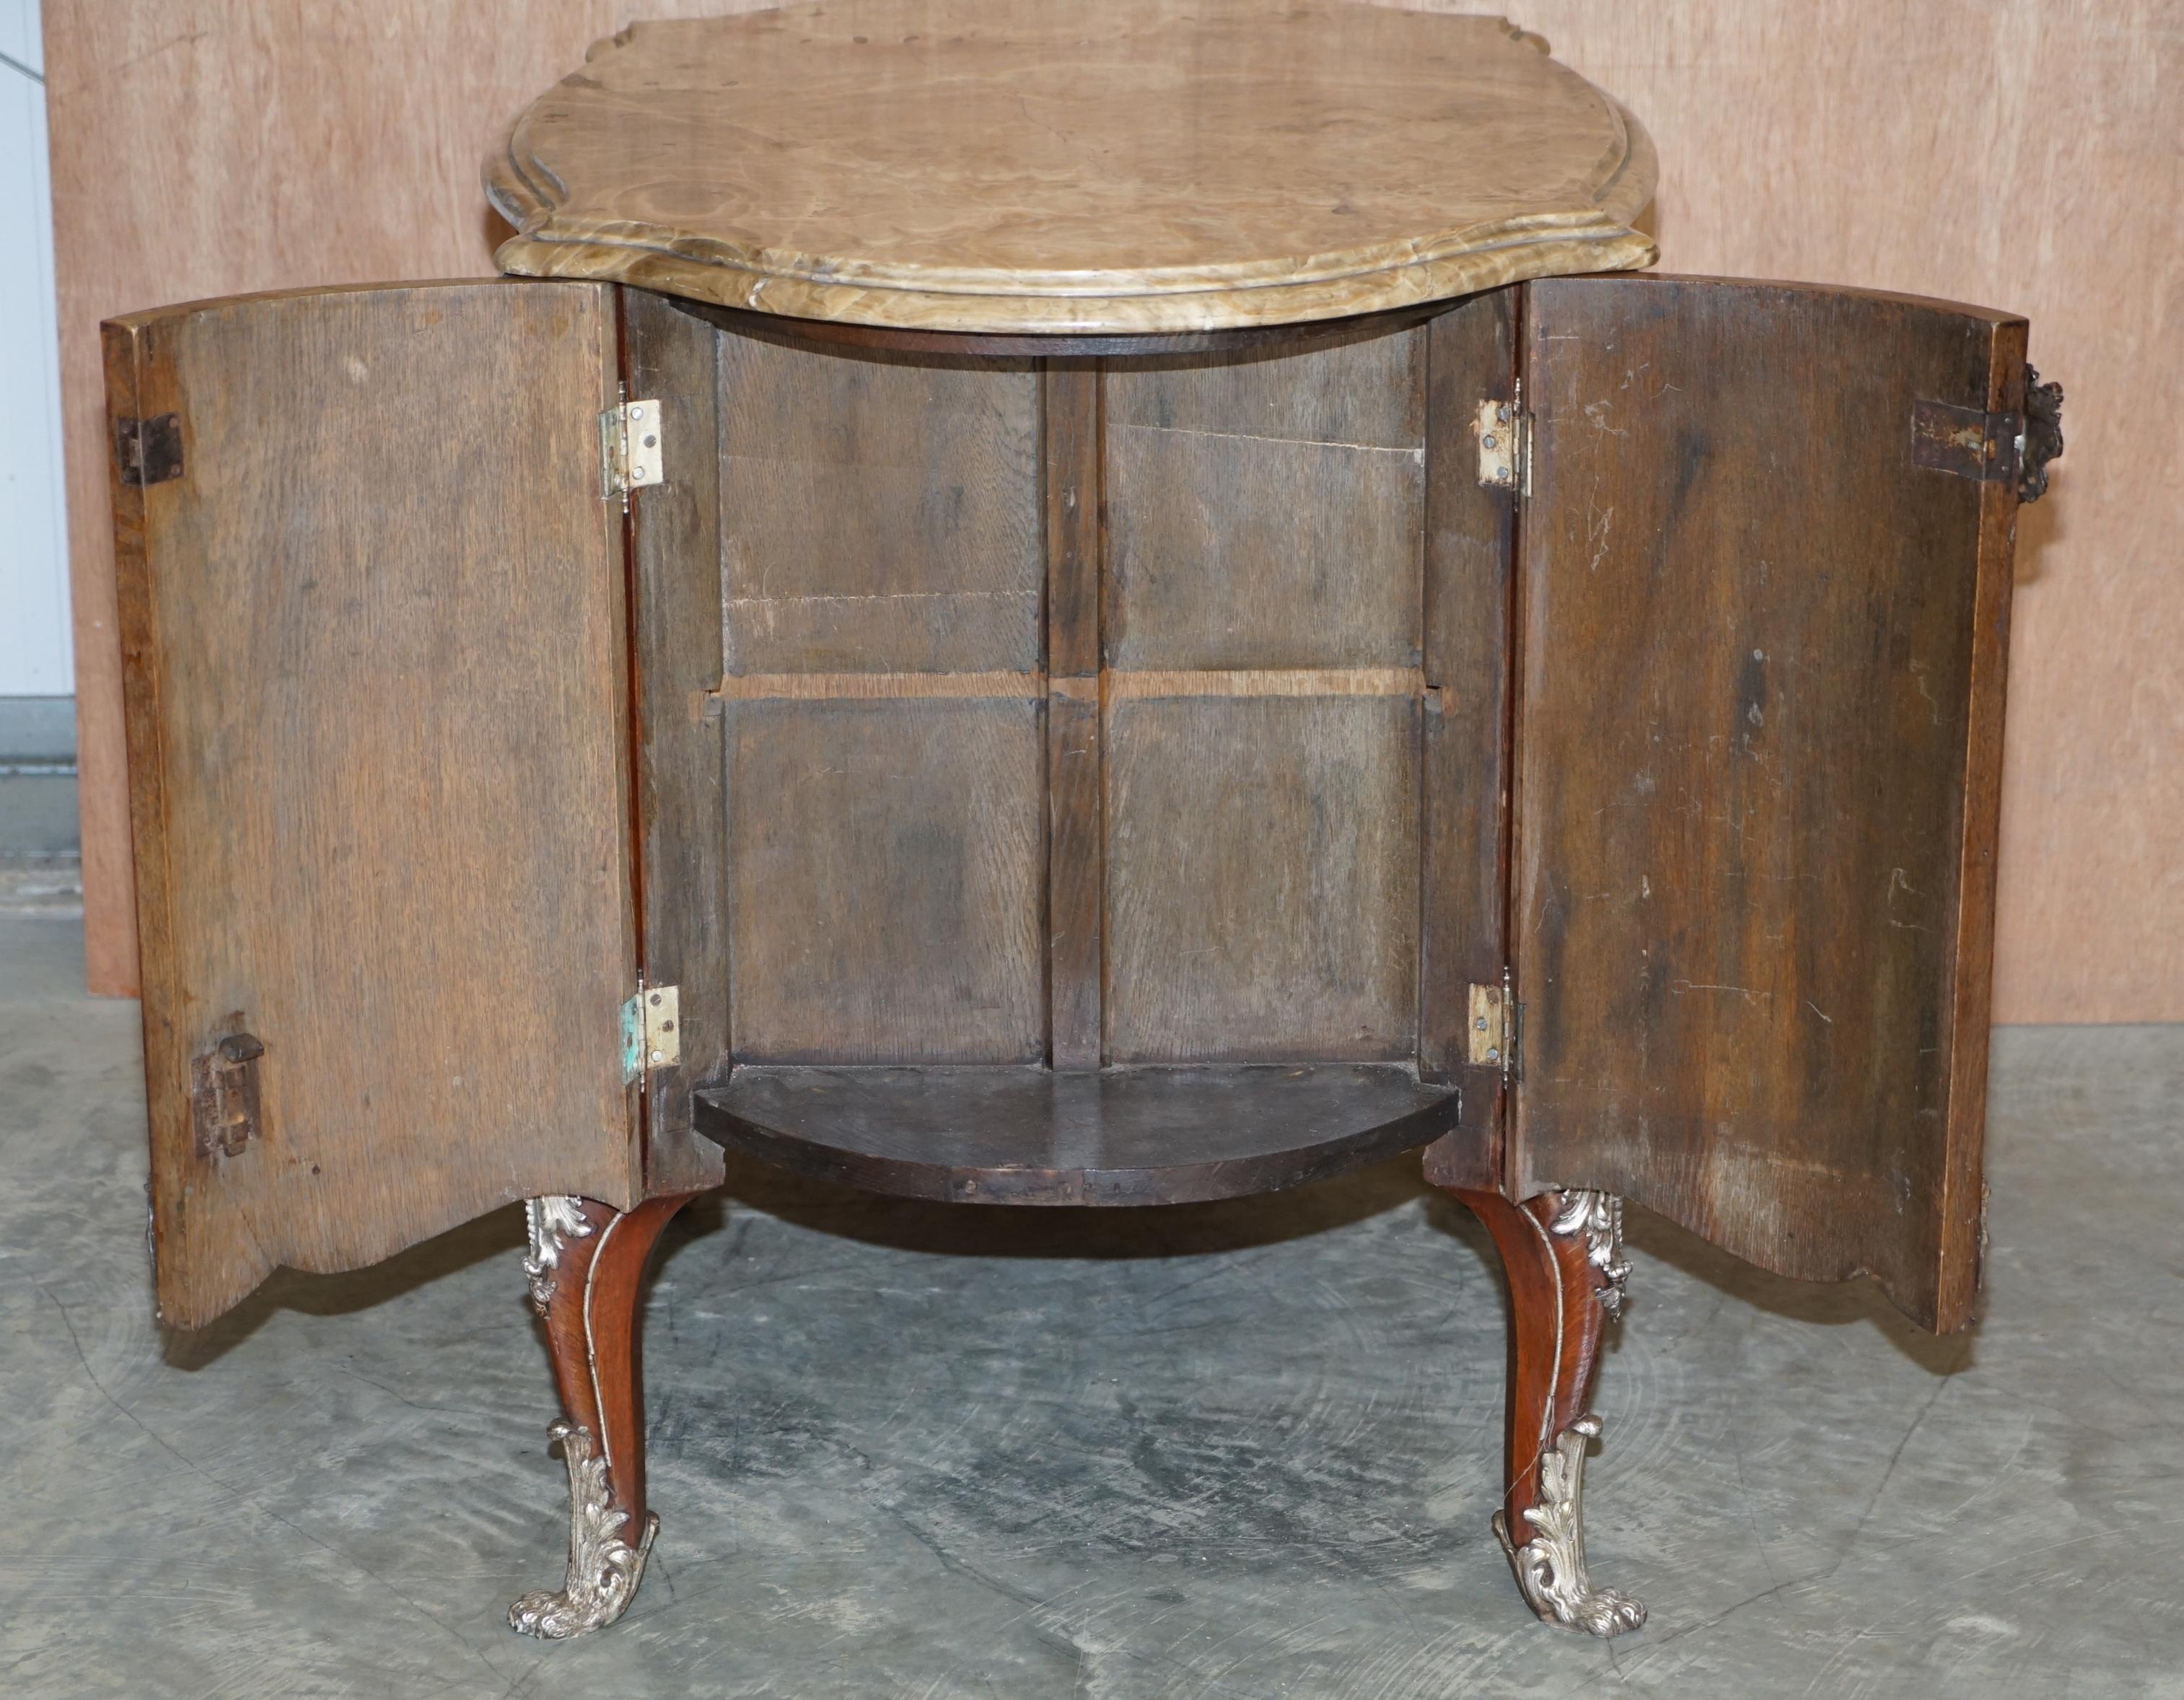 Rare & Collectable Germain Landrin circa 1750 French Marble Kingwood Sideboard For Sale 9